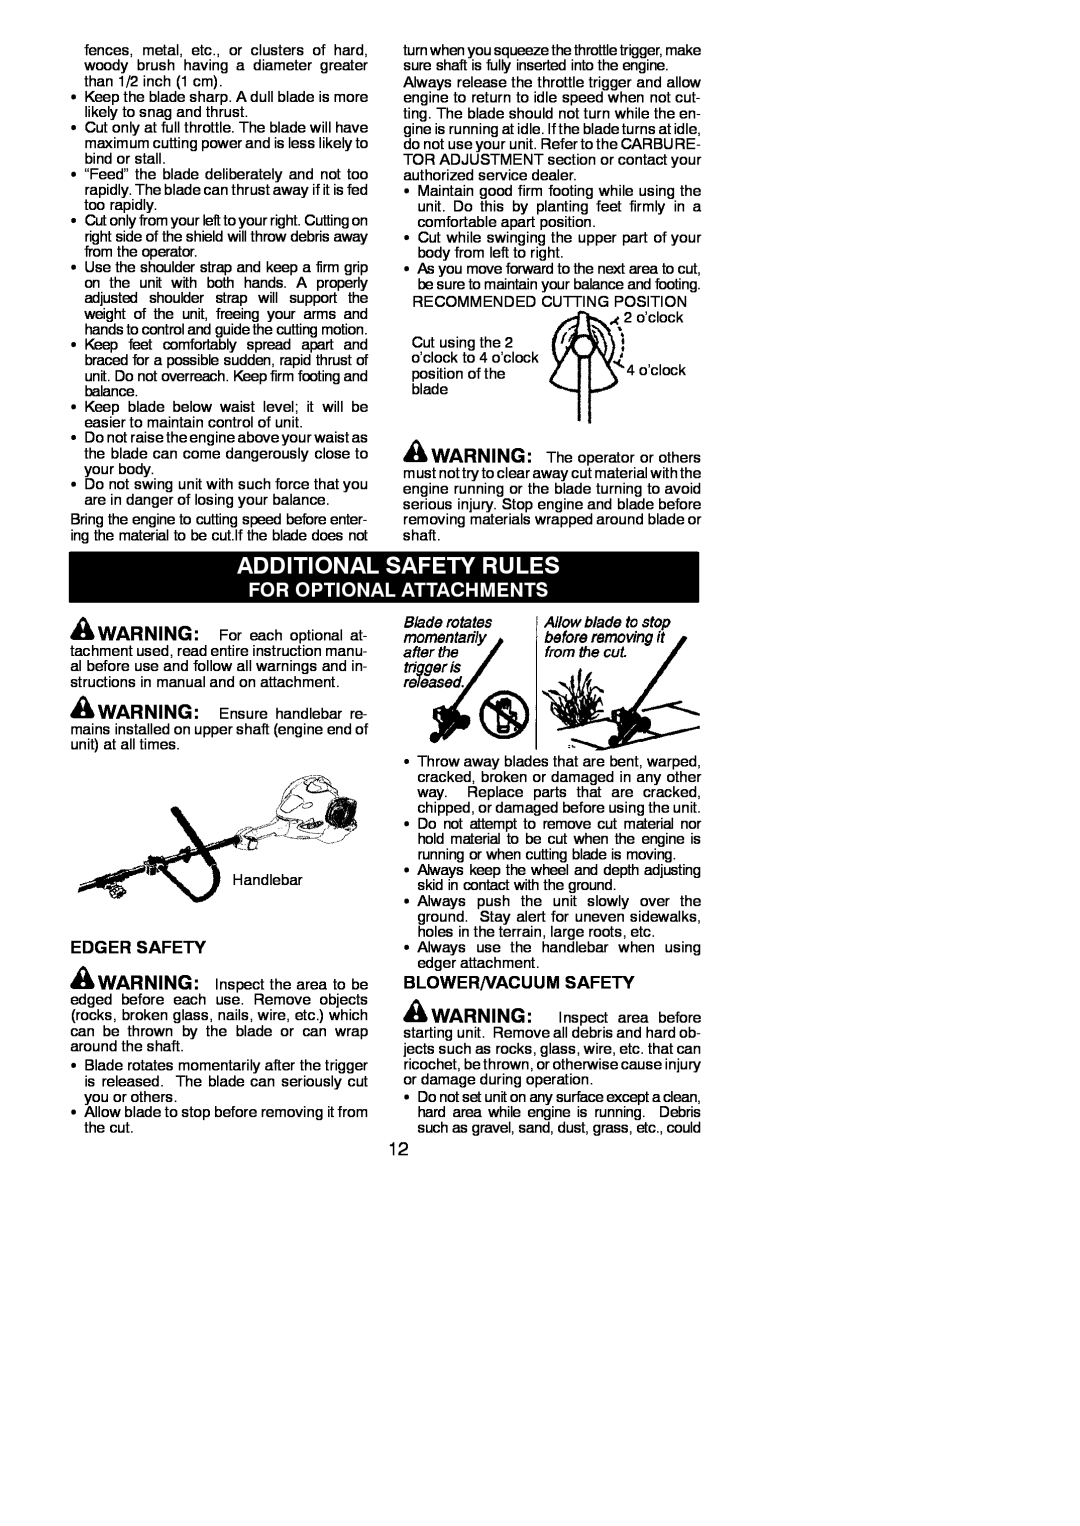 Poulan PP325 instruction manual Additional Safety Rules, For Optional Attachments, Edger Safety, Blower/Vacuum Safety 